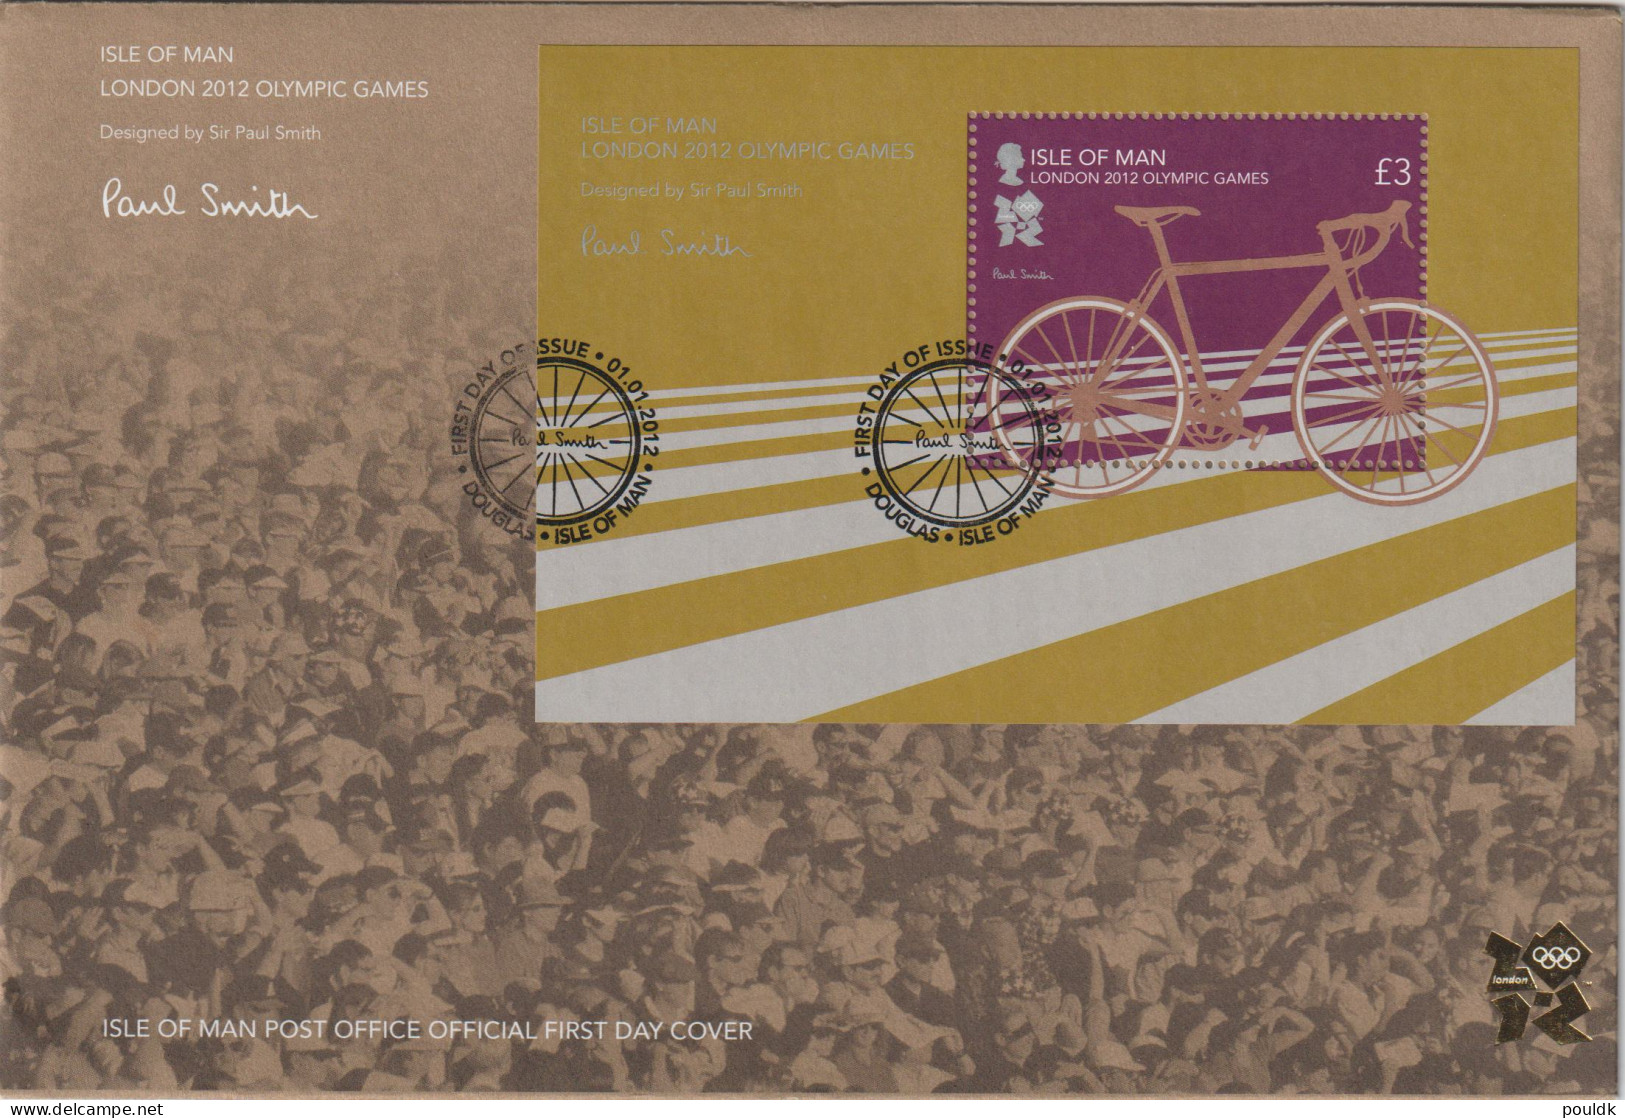 Isle Of Man 2012 Olympic Games London Souvenir Sheet FDC. Weight 0,04 Kg. Please Read Sales Conditions Under - Zomer 2012: Londen